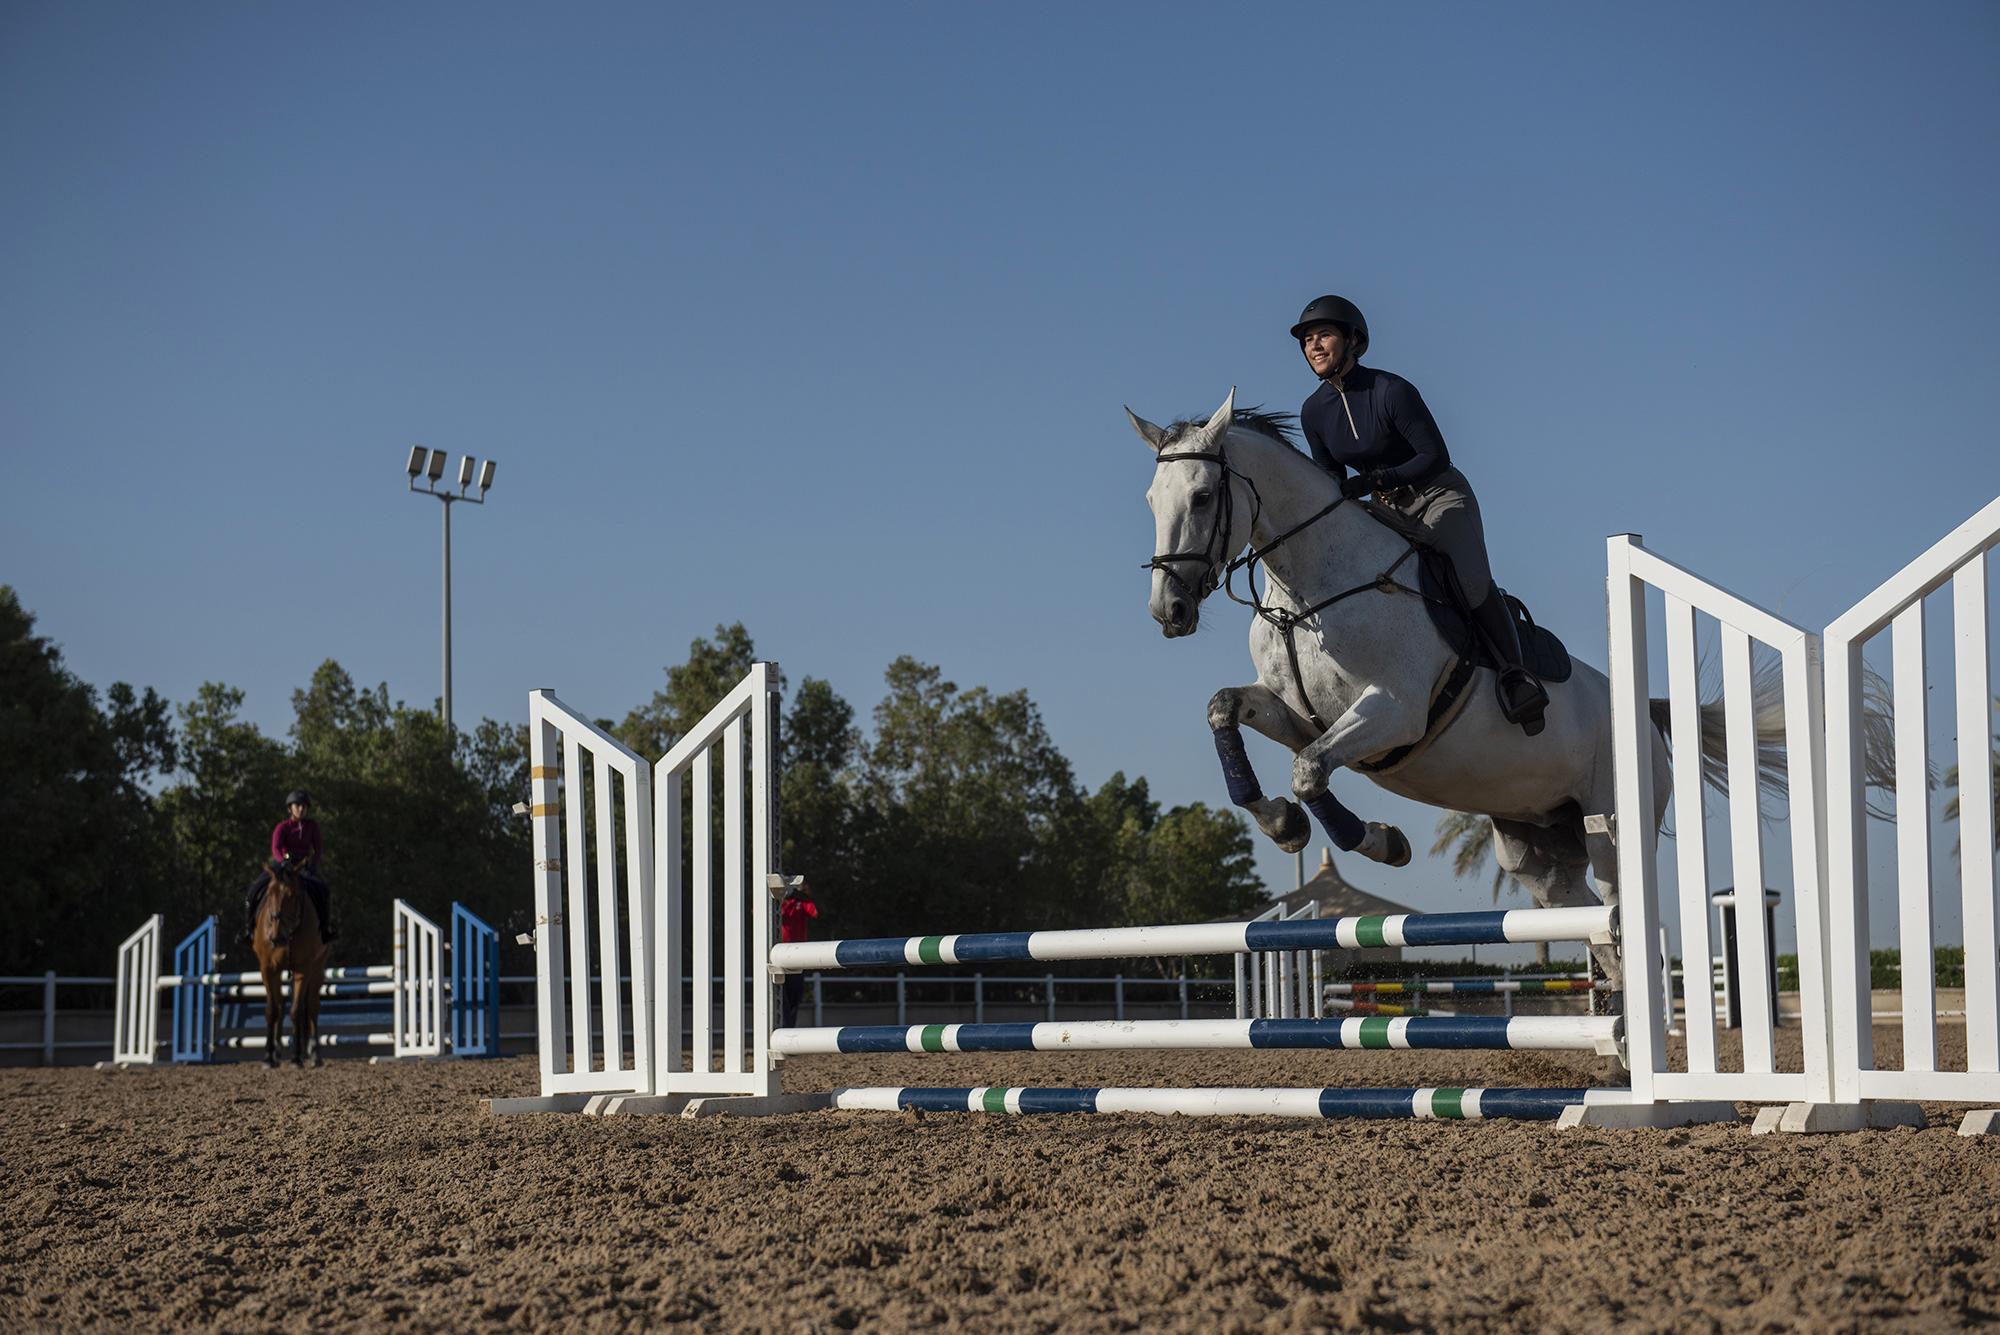 Emirati Woman: Living Dappled - "I feel it's unique" -  Nadine is a show-jumper; she has competed nationally and...